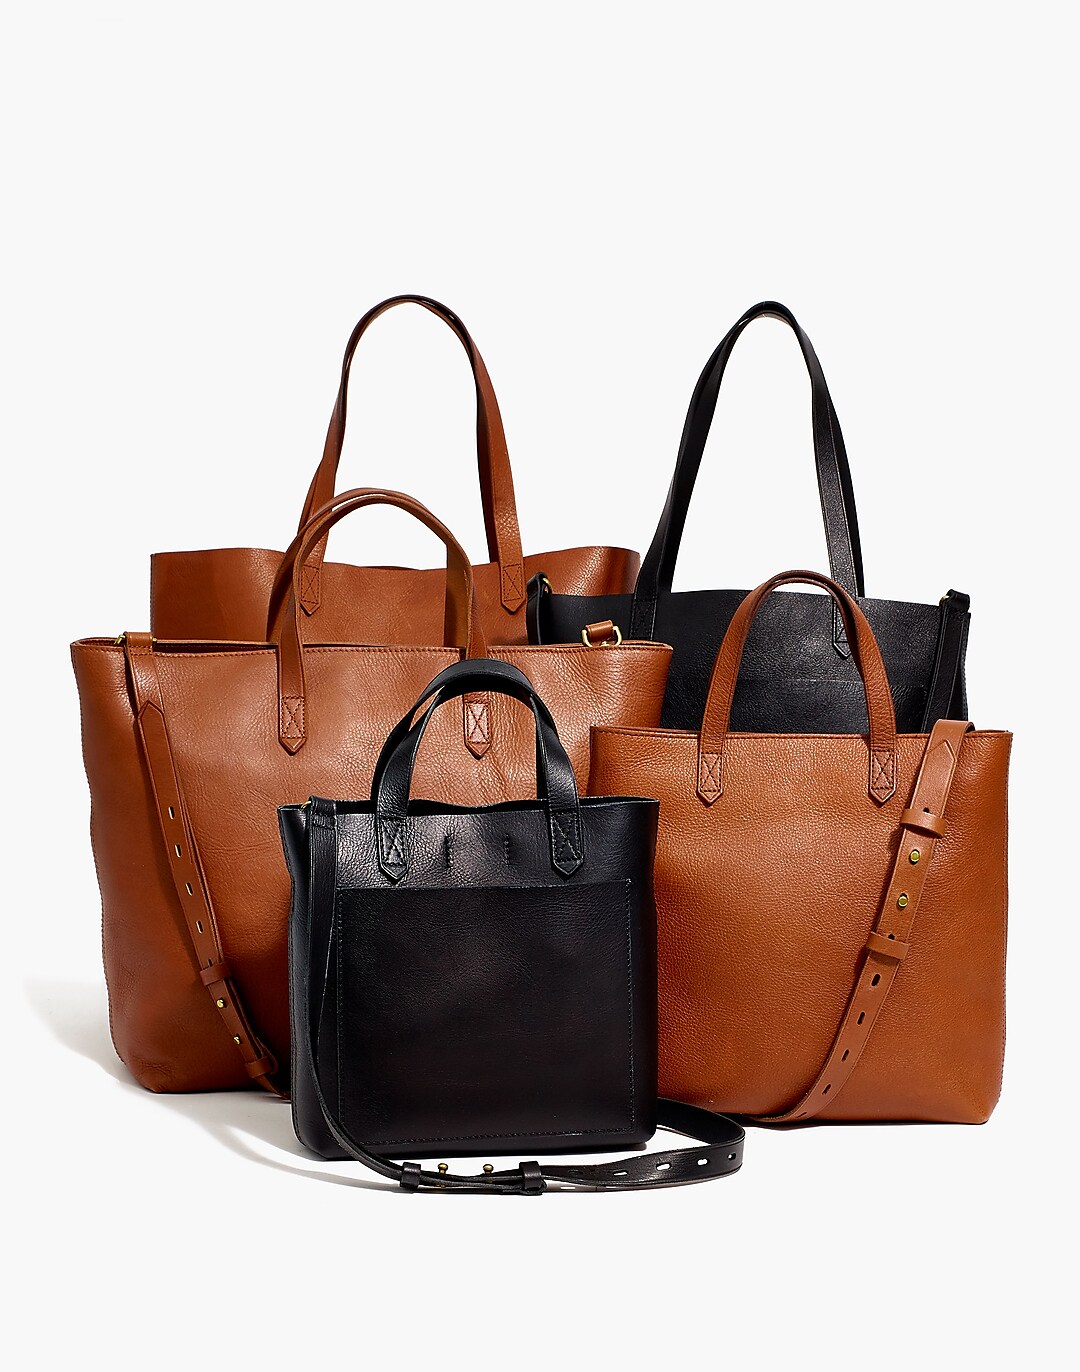 Shop Madewell Carryall Tote — Just $58